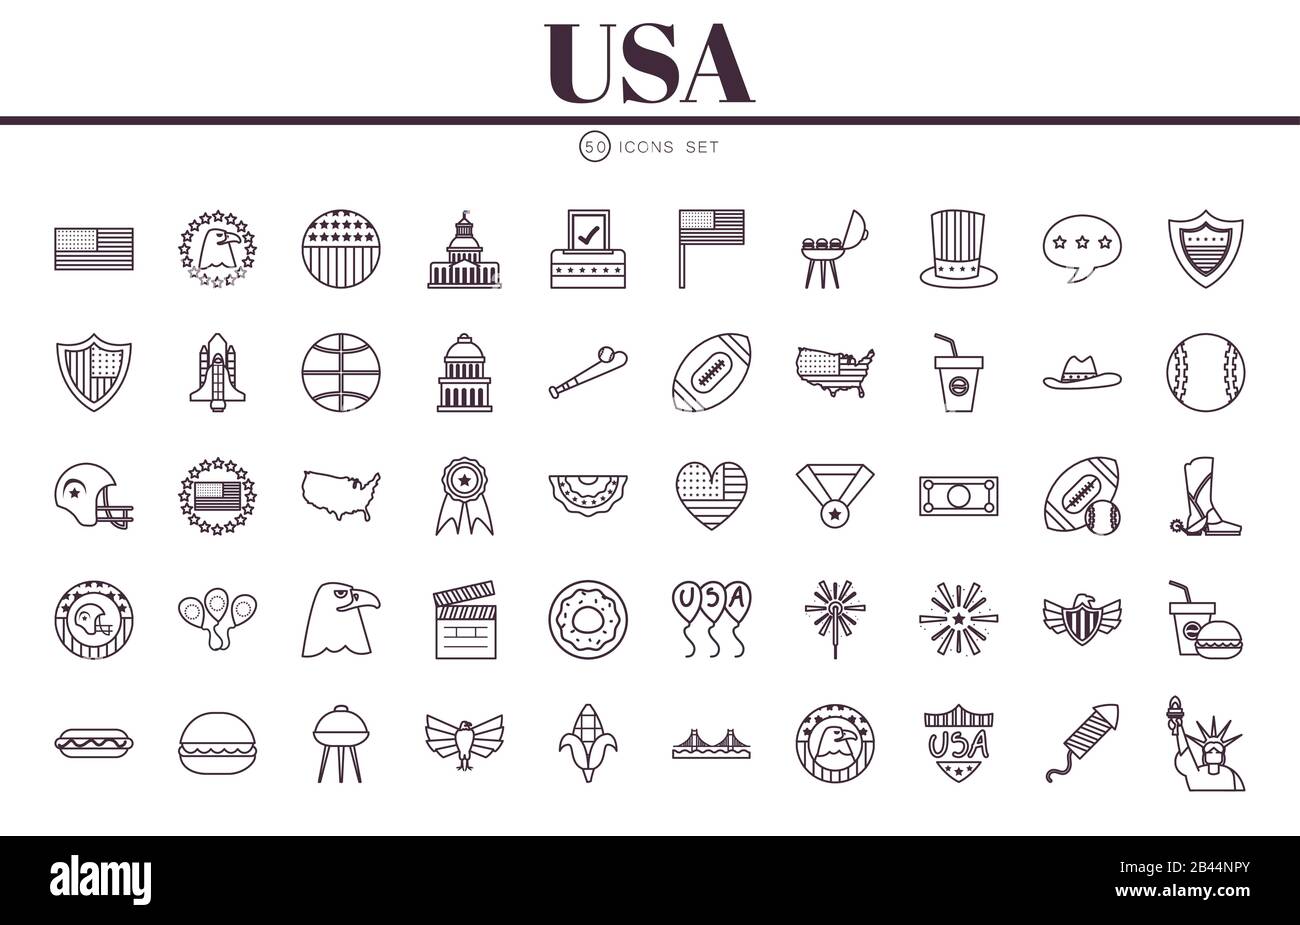 Usa Line Style Icon Set Design United States America Independence Day Nation Us Country And 6181